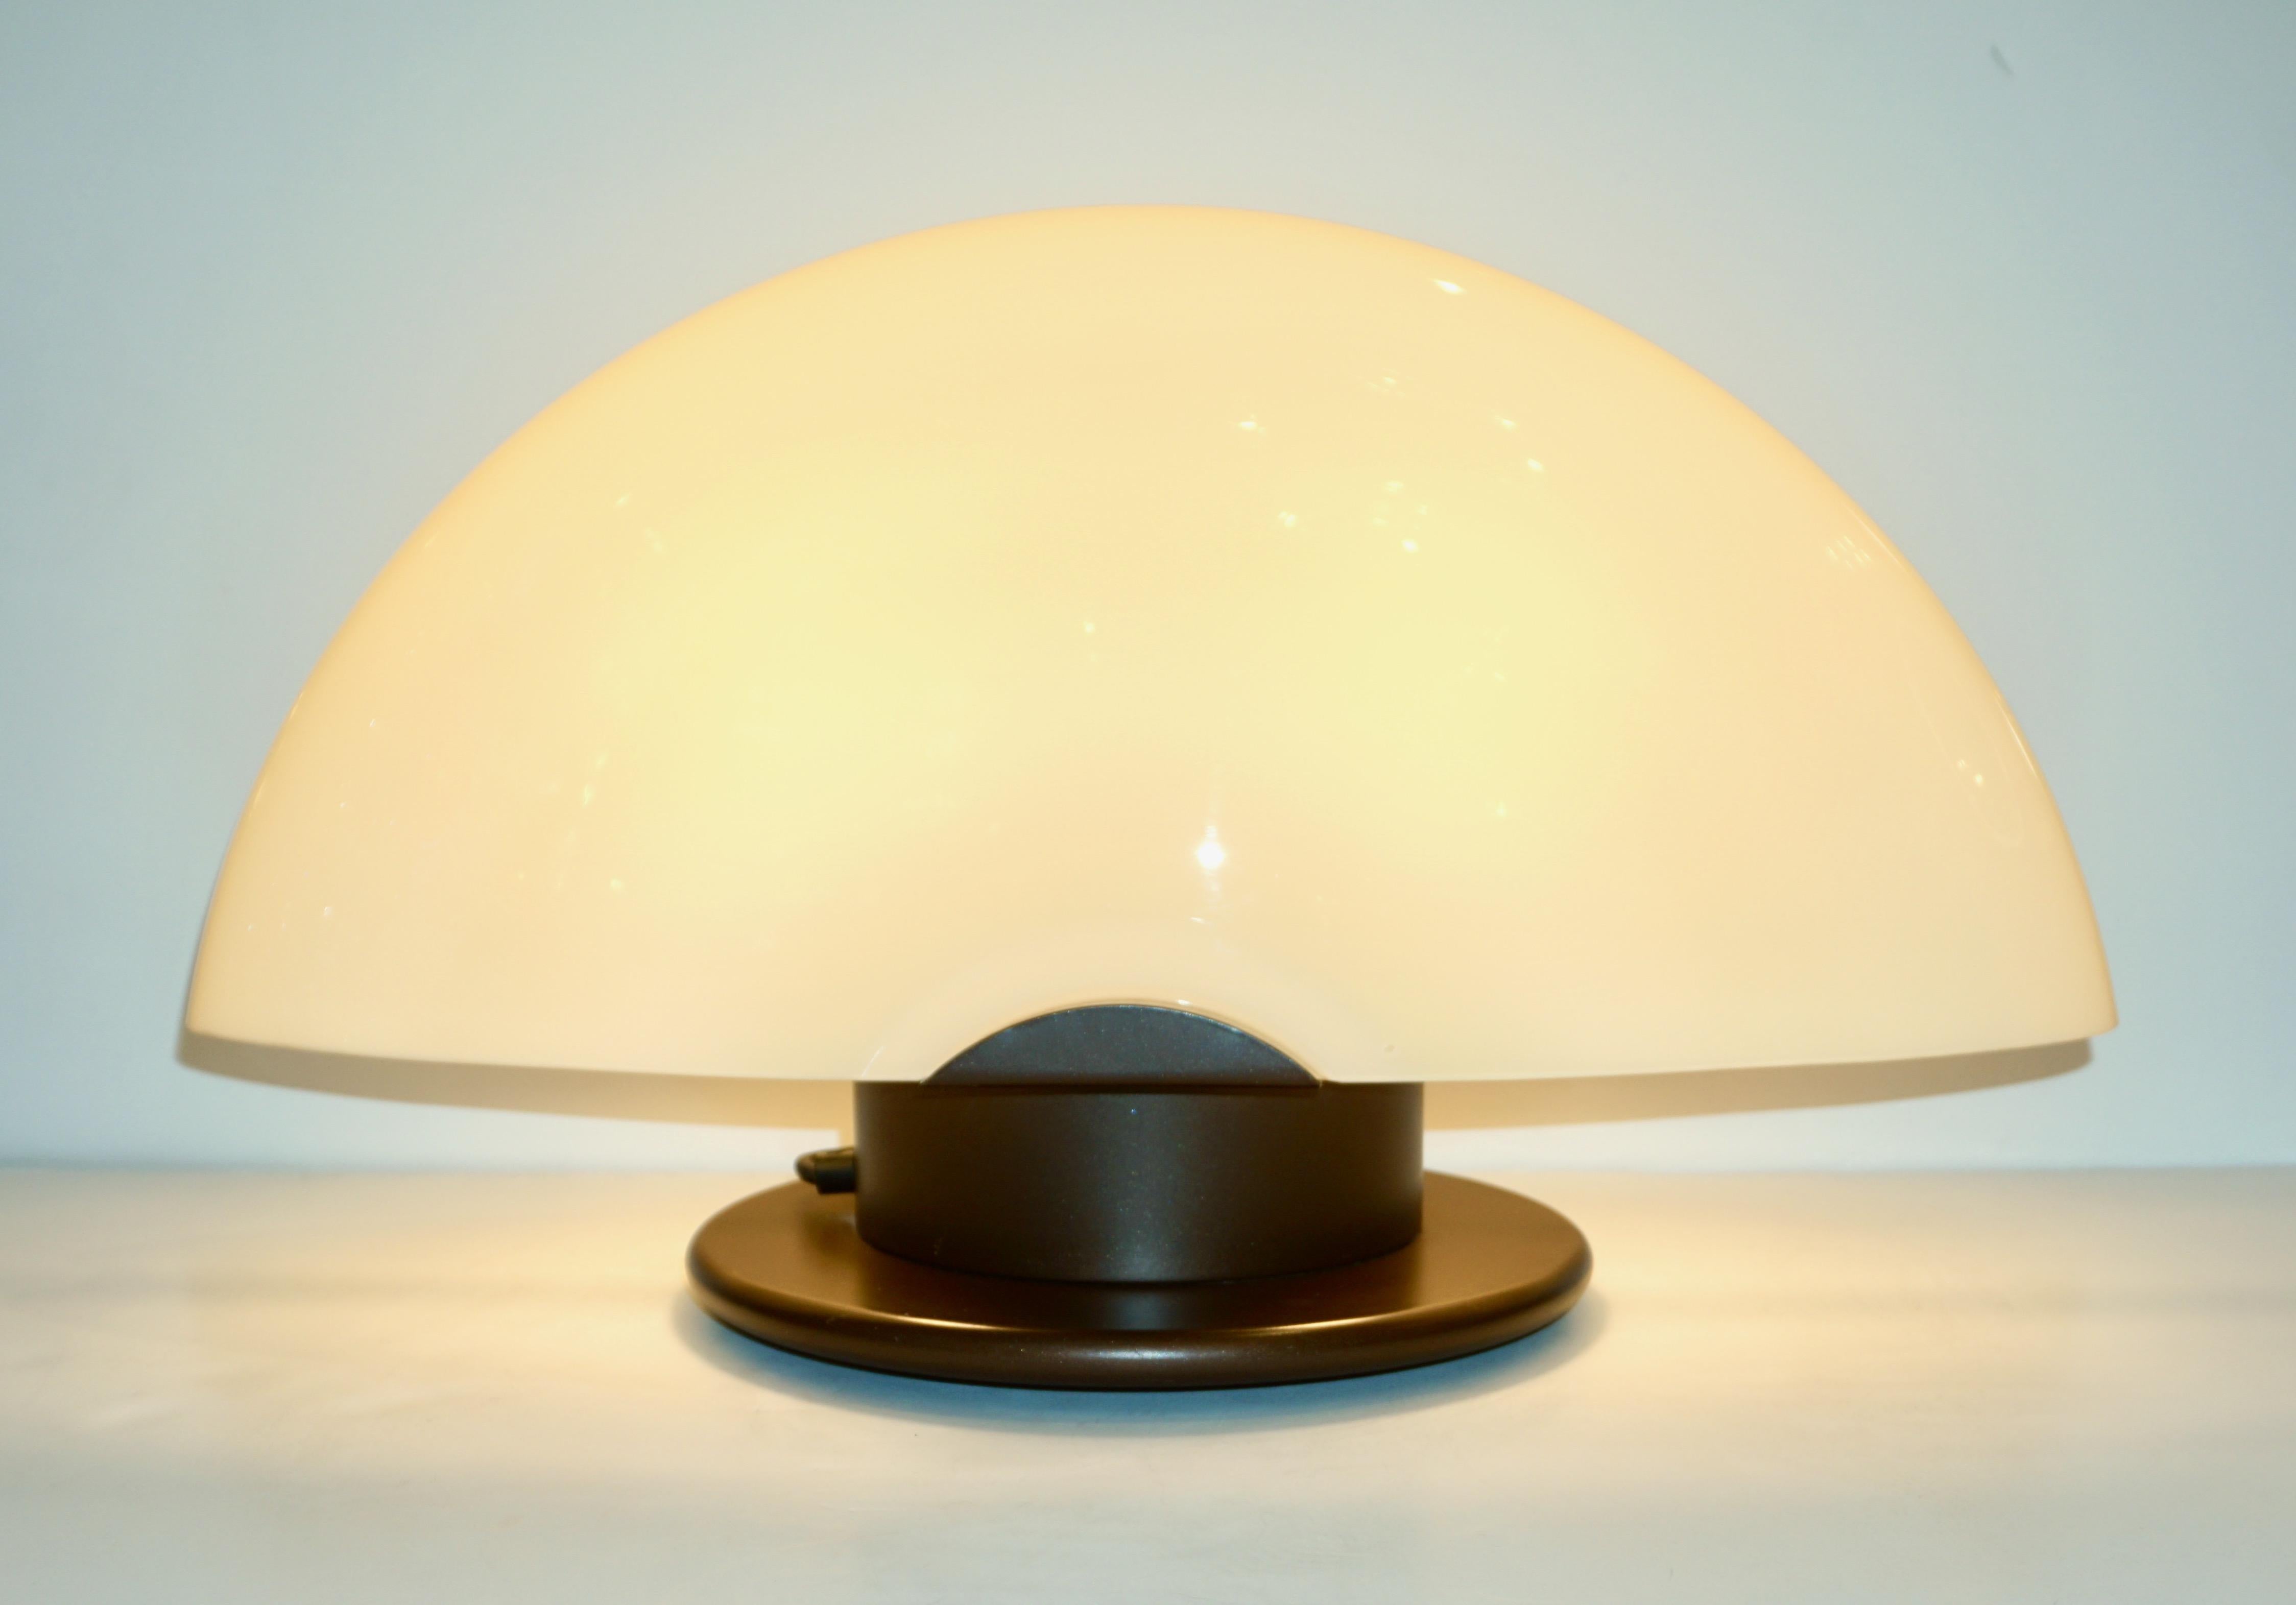 A vintage pair of modern design desk / table lamps by Mazzega with an atomic age flair, entirely made in Italy, consisting of a round metal base lacquered in a copper brown finish supporting a demilune shade in a warm ivory cream Murano glass